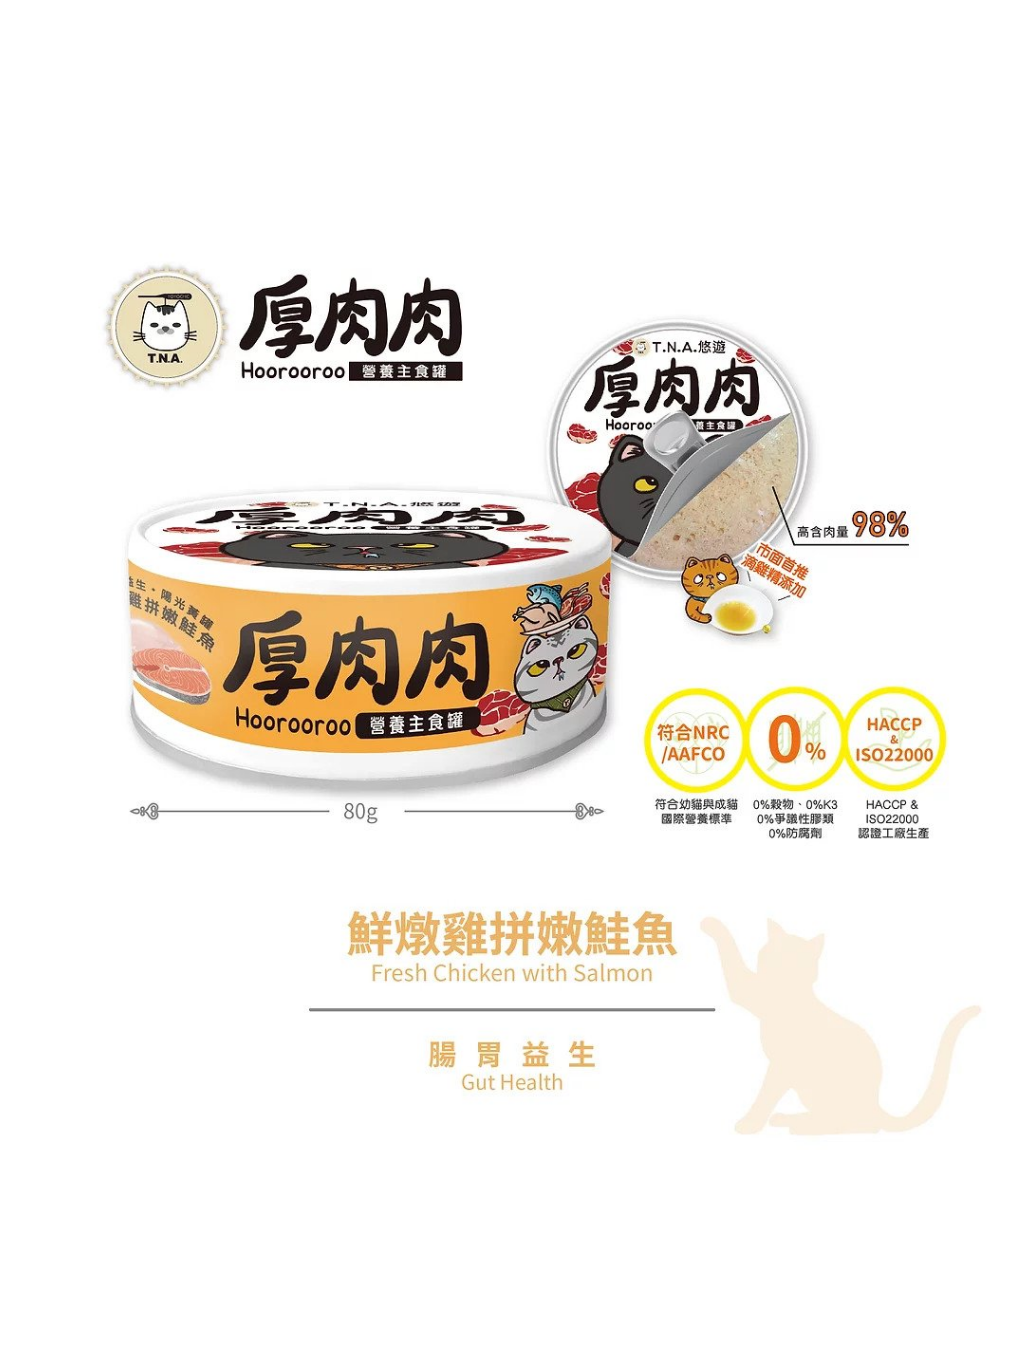 TNA | Thick Meat Drip Chicken Essence Nutritional Staple Food Can-Fresh Stewed Chicken and Tender Salmon (Yellow Can)